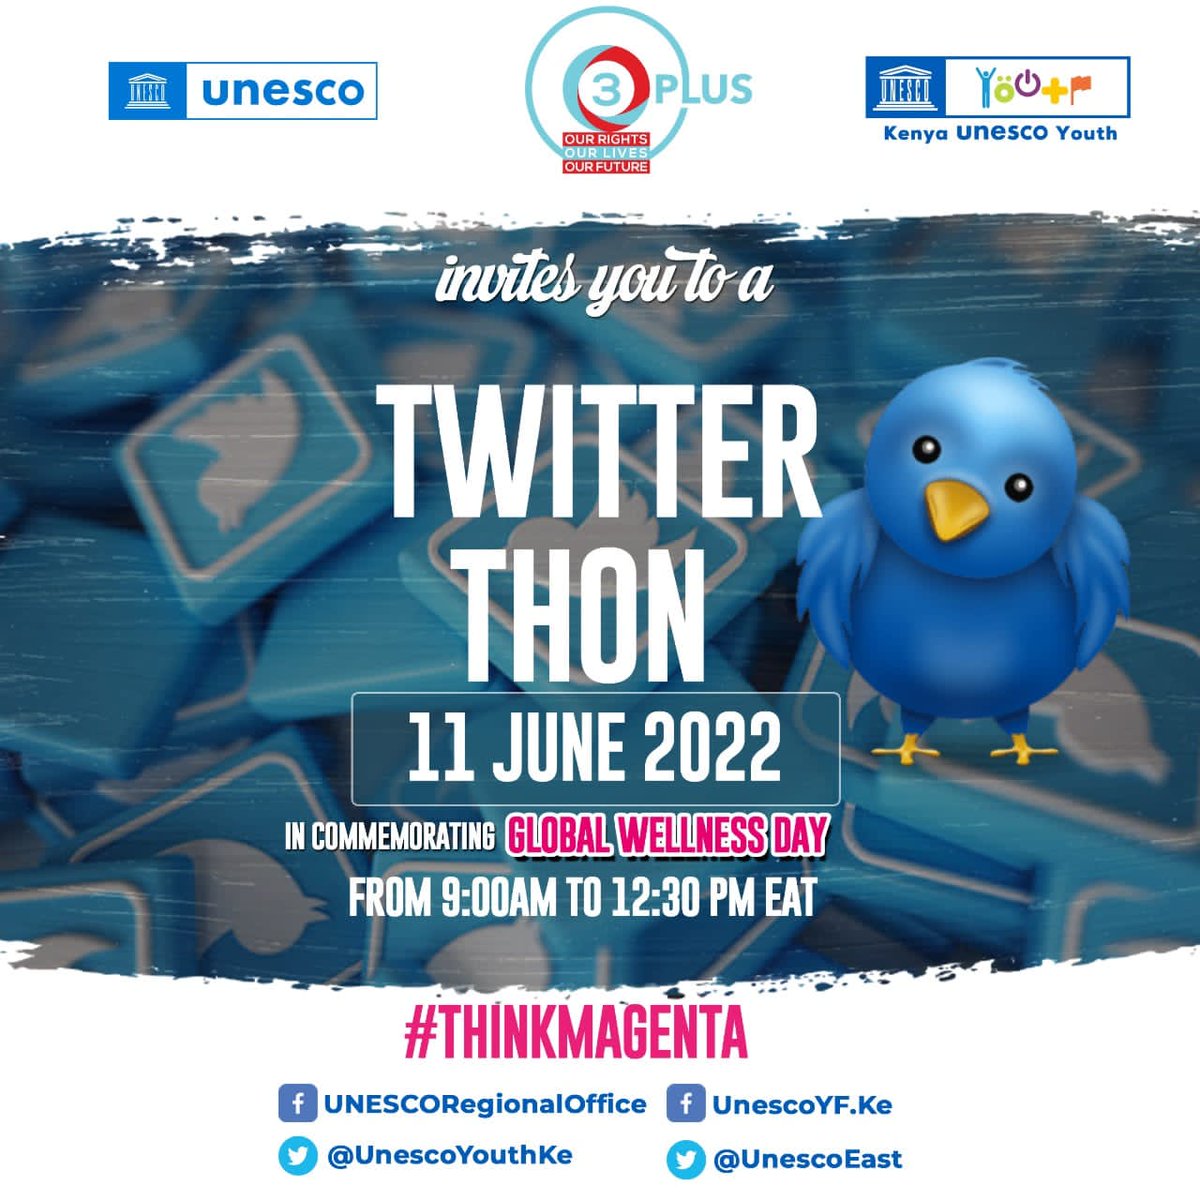 He who has health has hope, and he who has hope has everything
@UnescoYouthKe 
@UnescoEast 
@NatcomUnescoKe 
@collinsoswago

#ThinkMagenta #GWD22 #03plus #Fit4life #heights4health